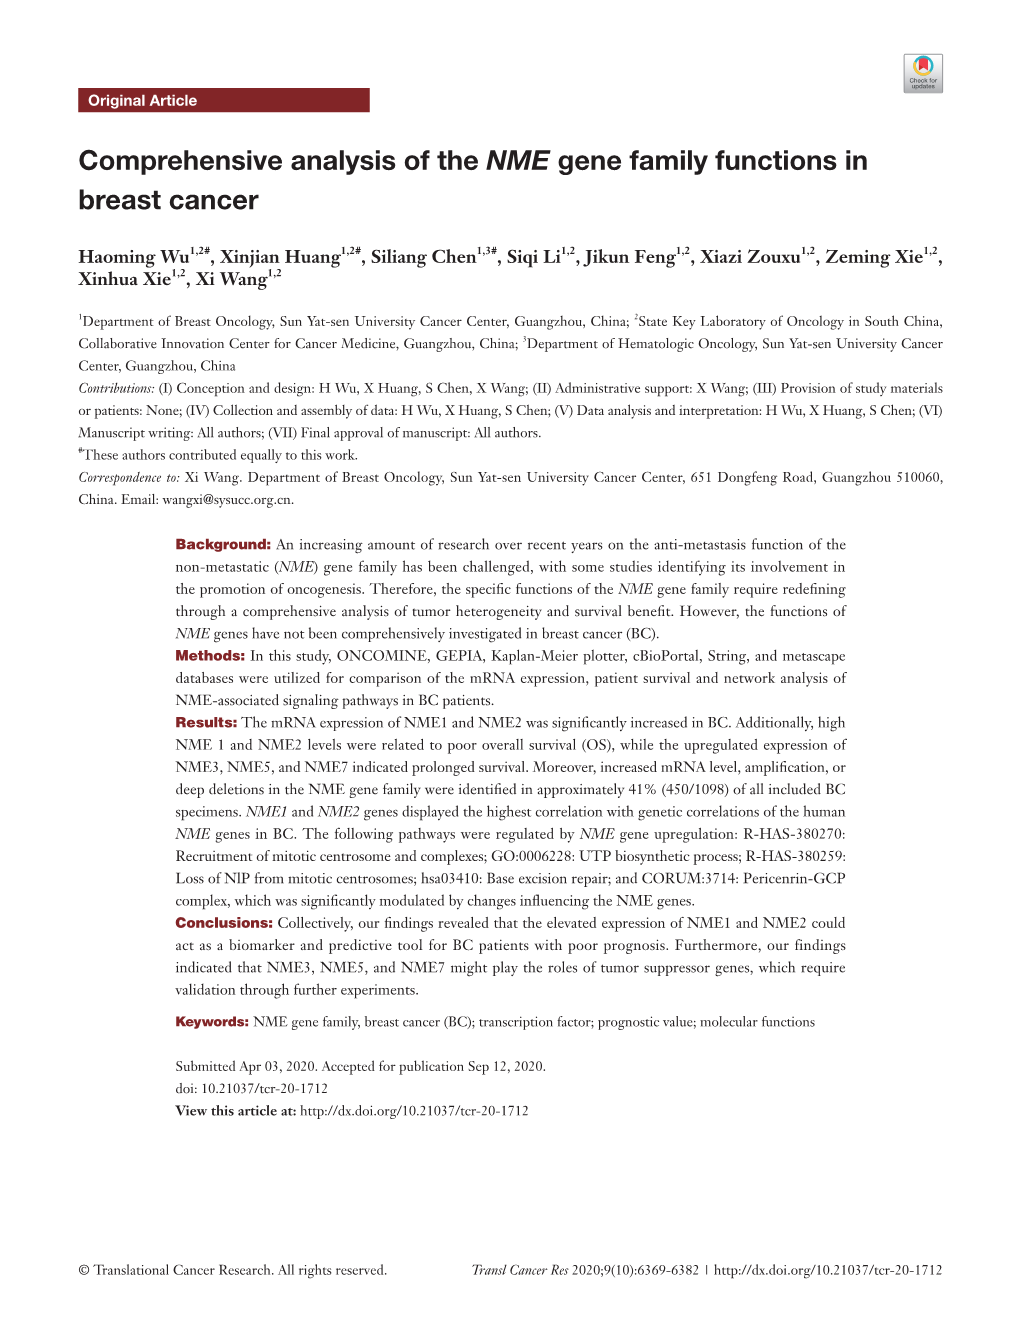 Comprehensive Analysis of the NME Gene Family Functions in Breast Cancer